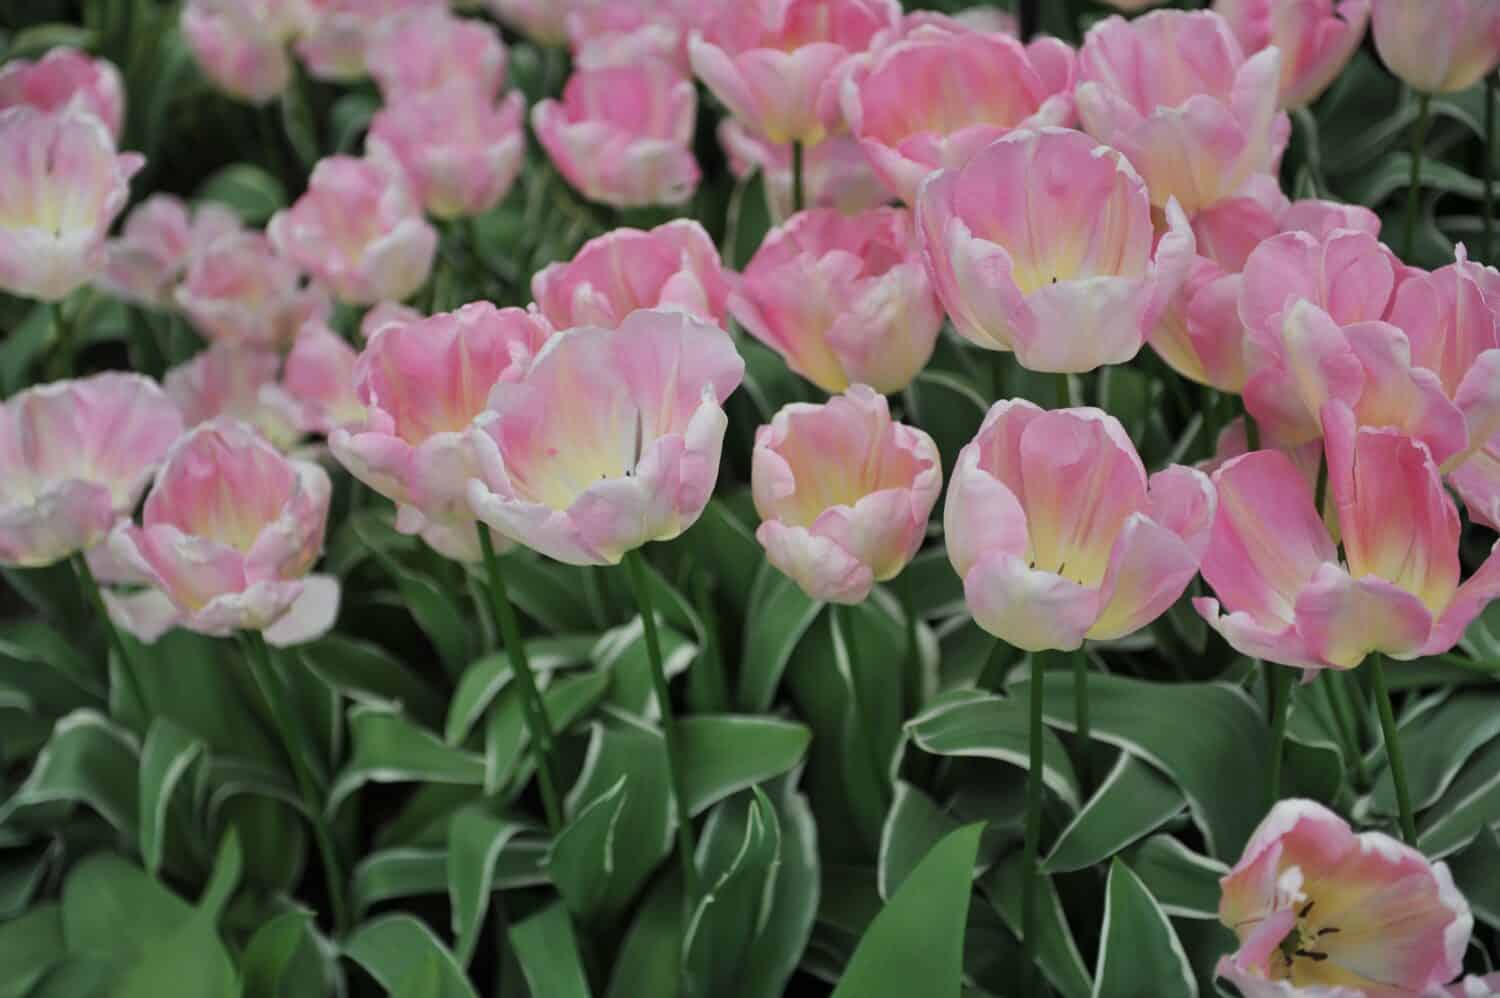 Pink Triumph tulips (Tulipa) New Design with variegated leaves bloom in a garden in April